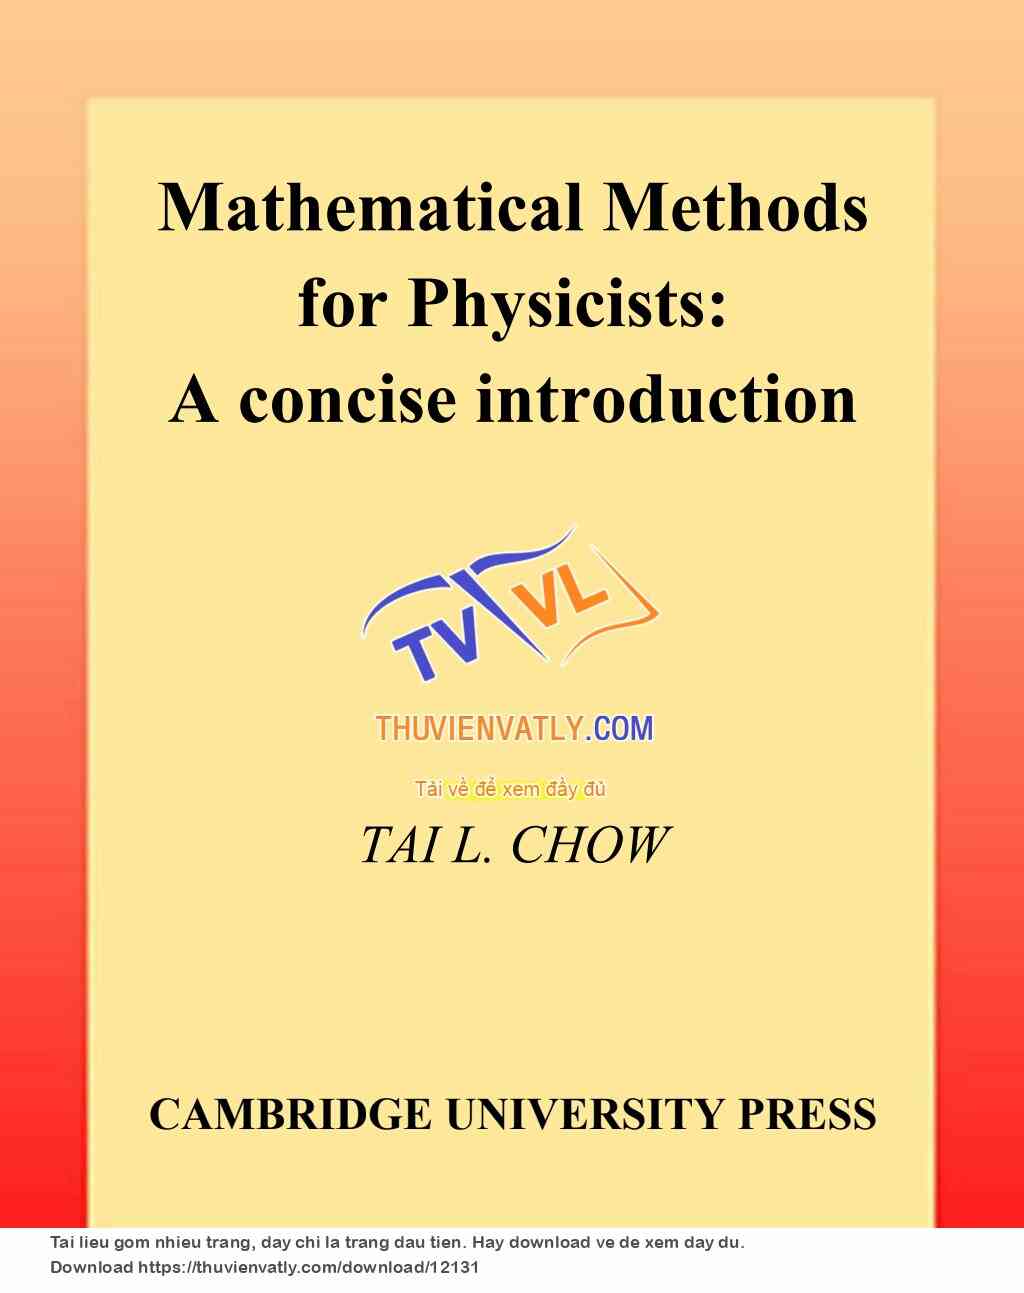 Mathematical Methods for Physicists (TAI L. CHOW)